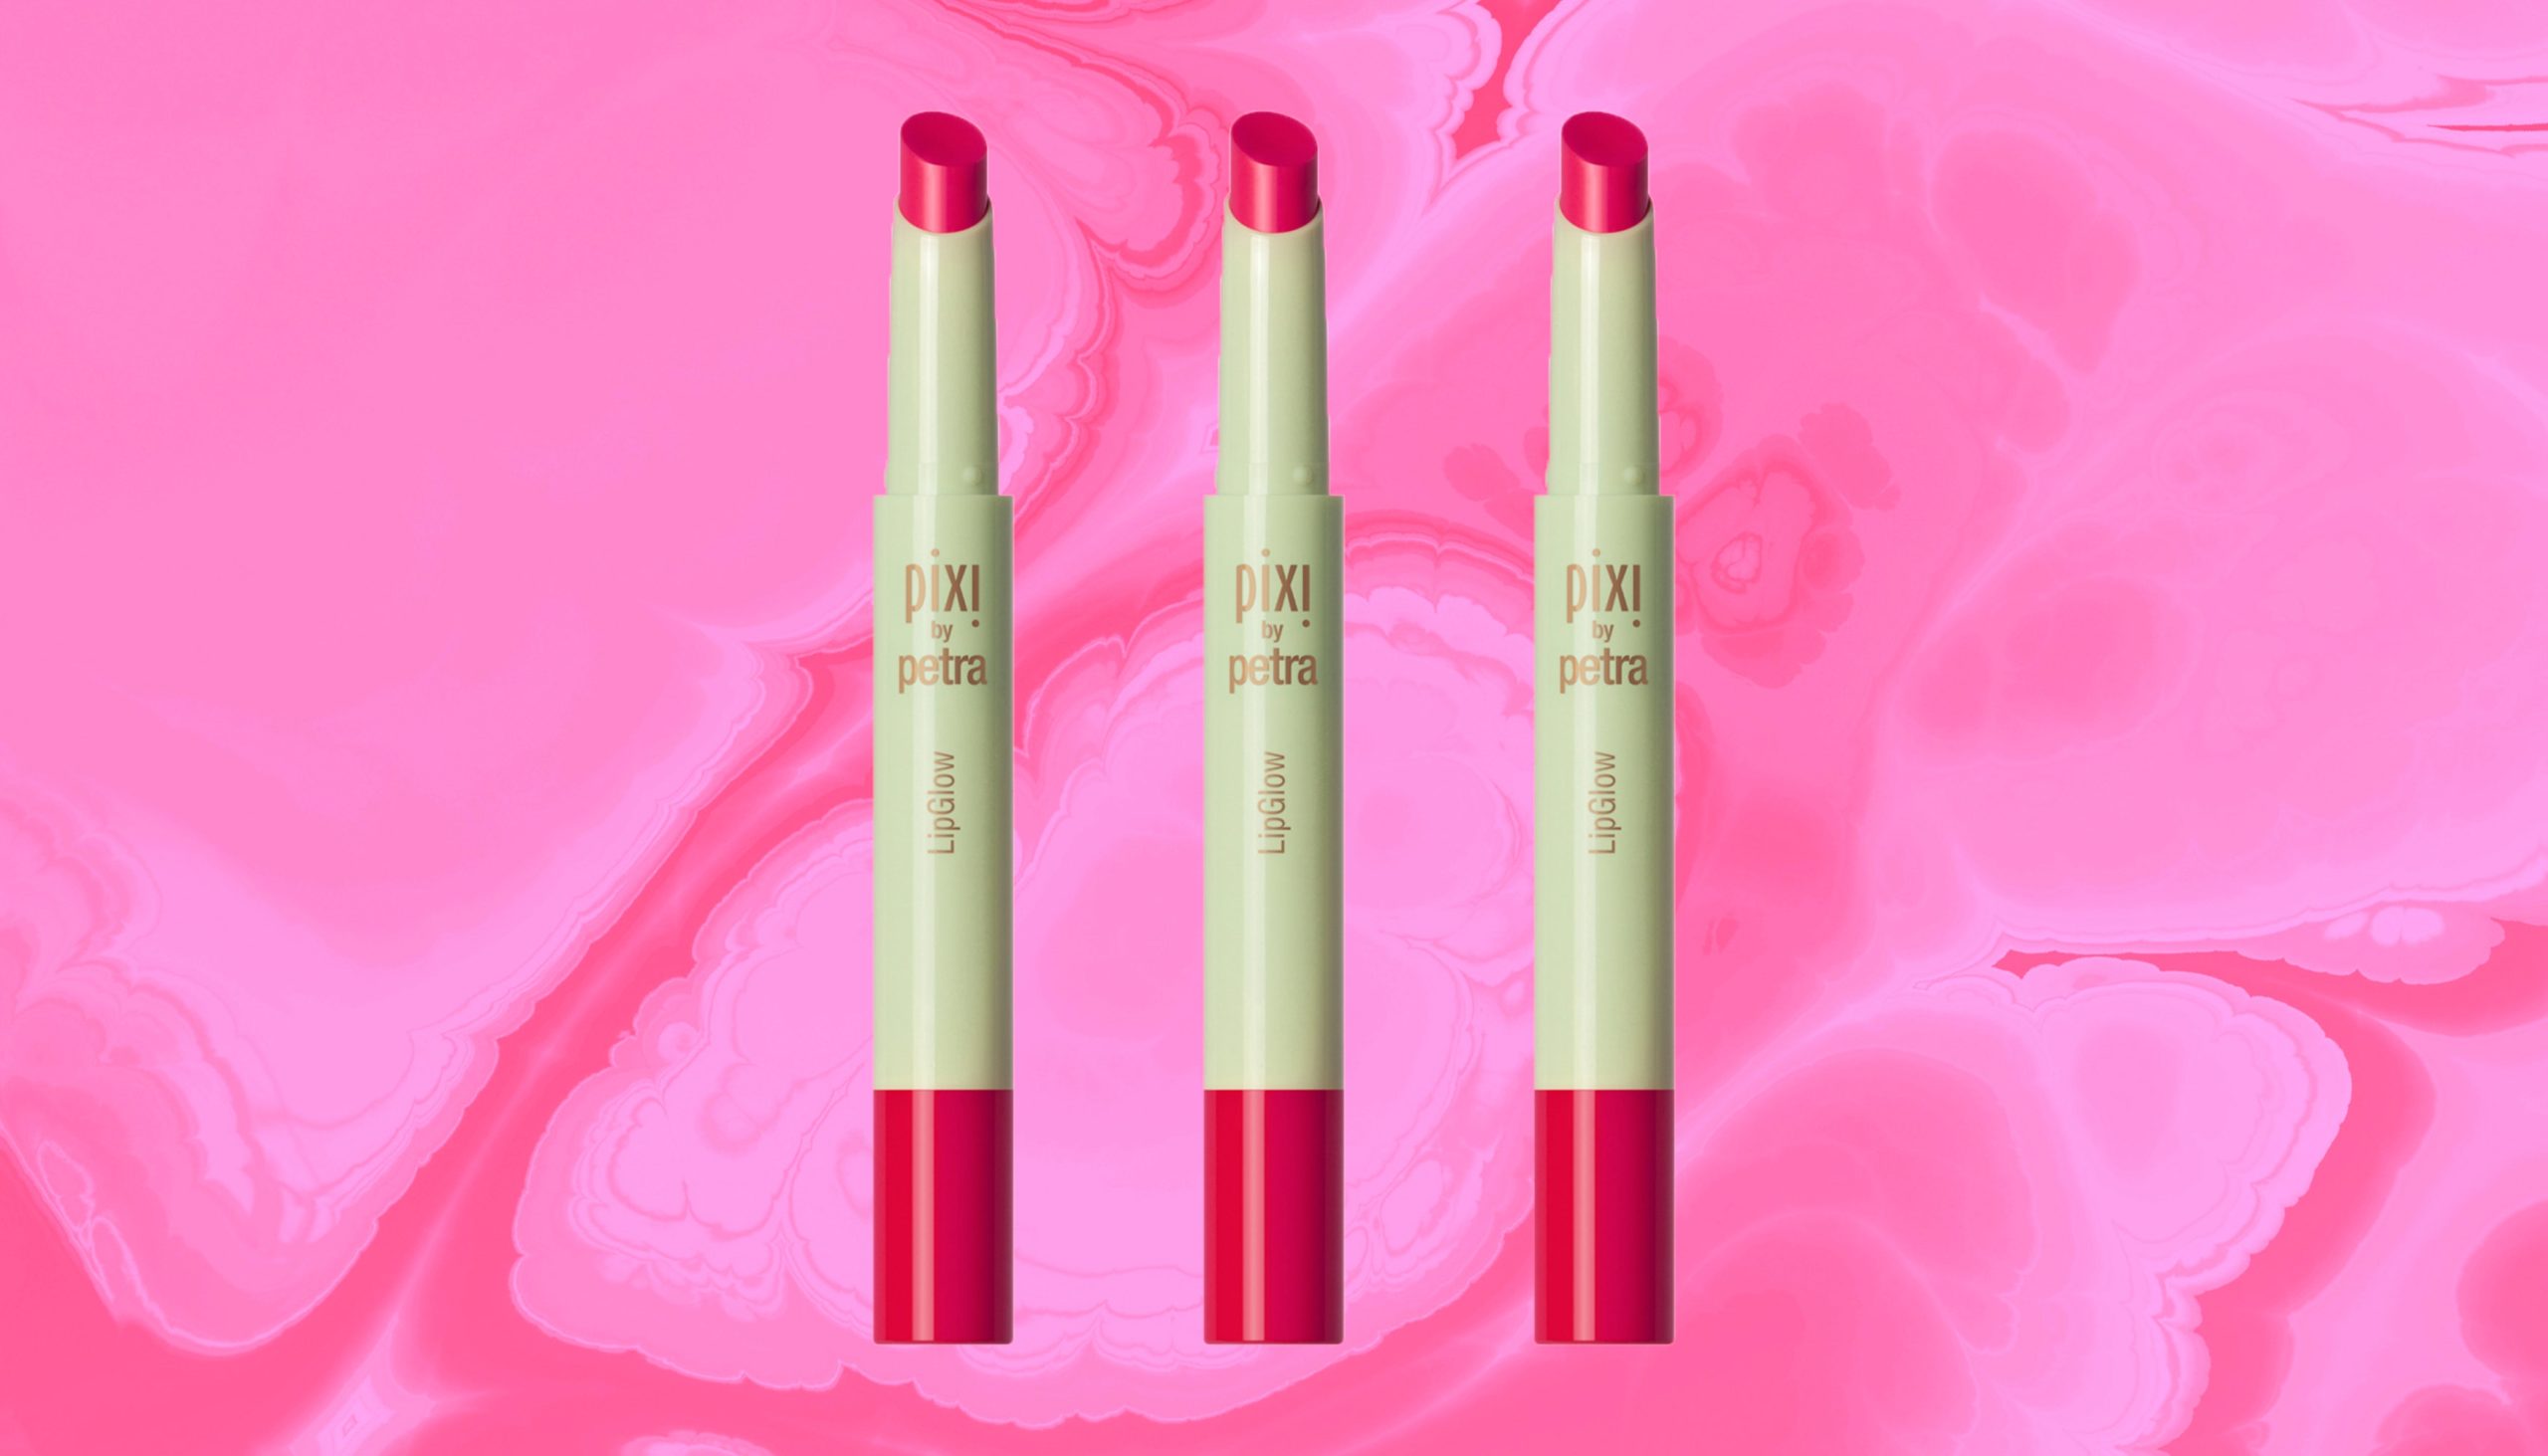 Pixi’s Beauty LipGlow Gives Me a Lovely My-Lips-but-Better Hue